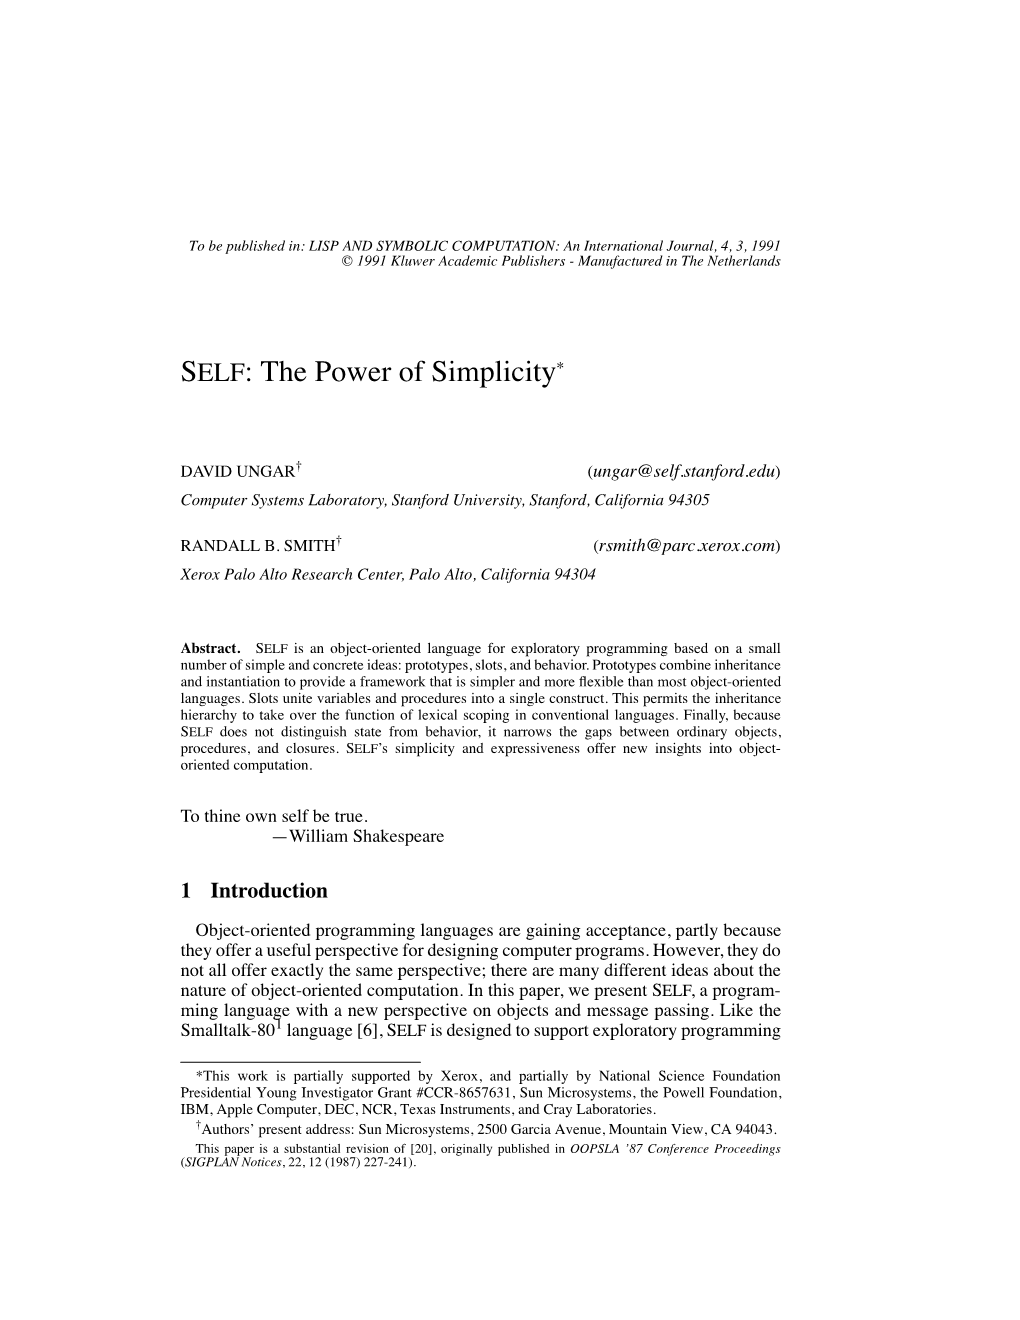 SELF: the Power of Simplicity*